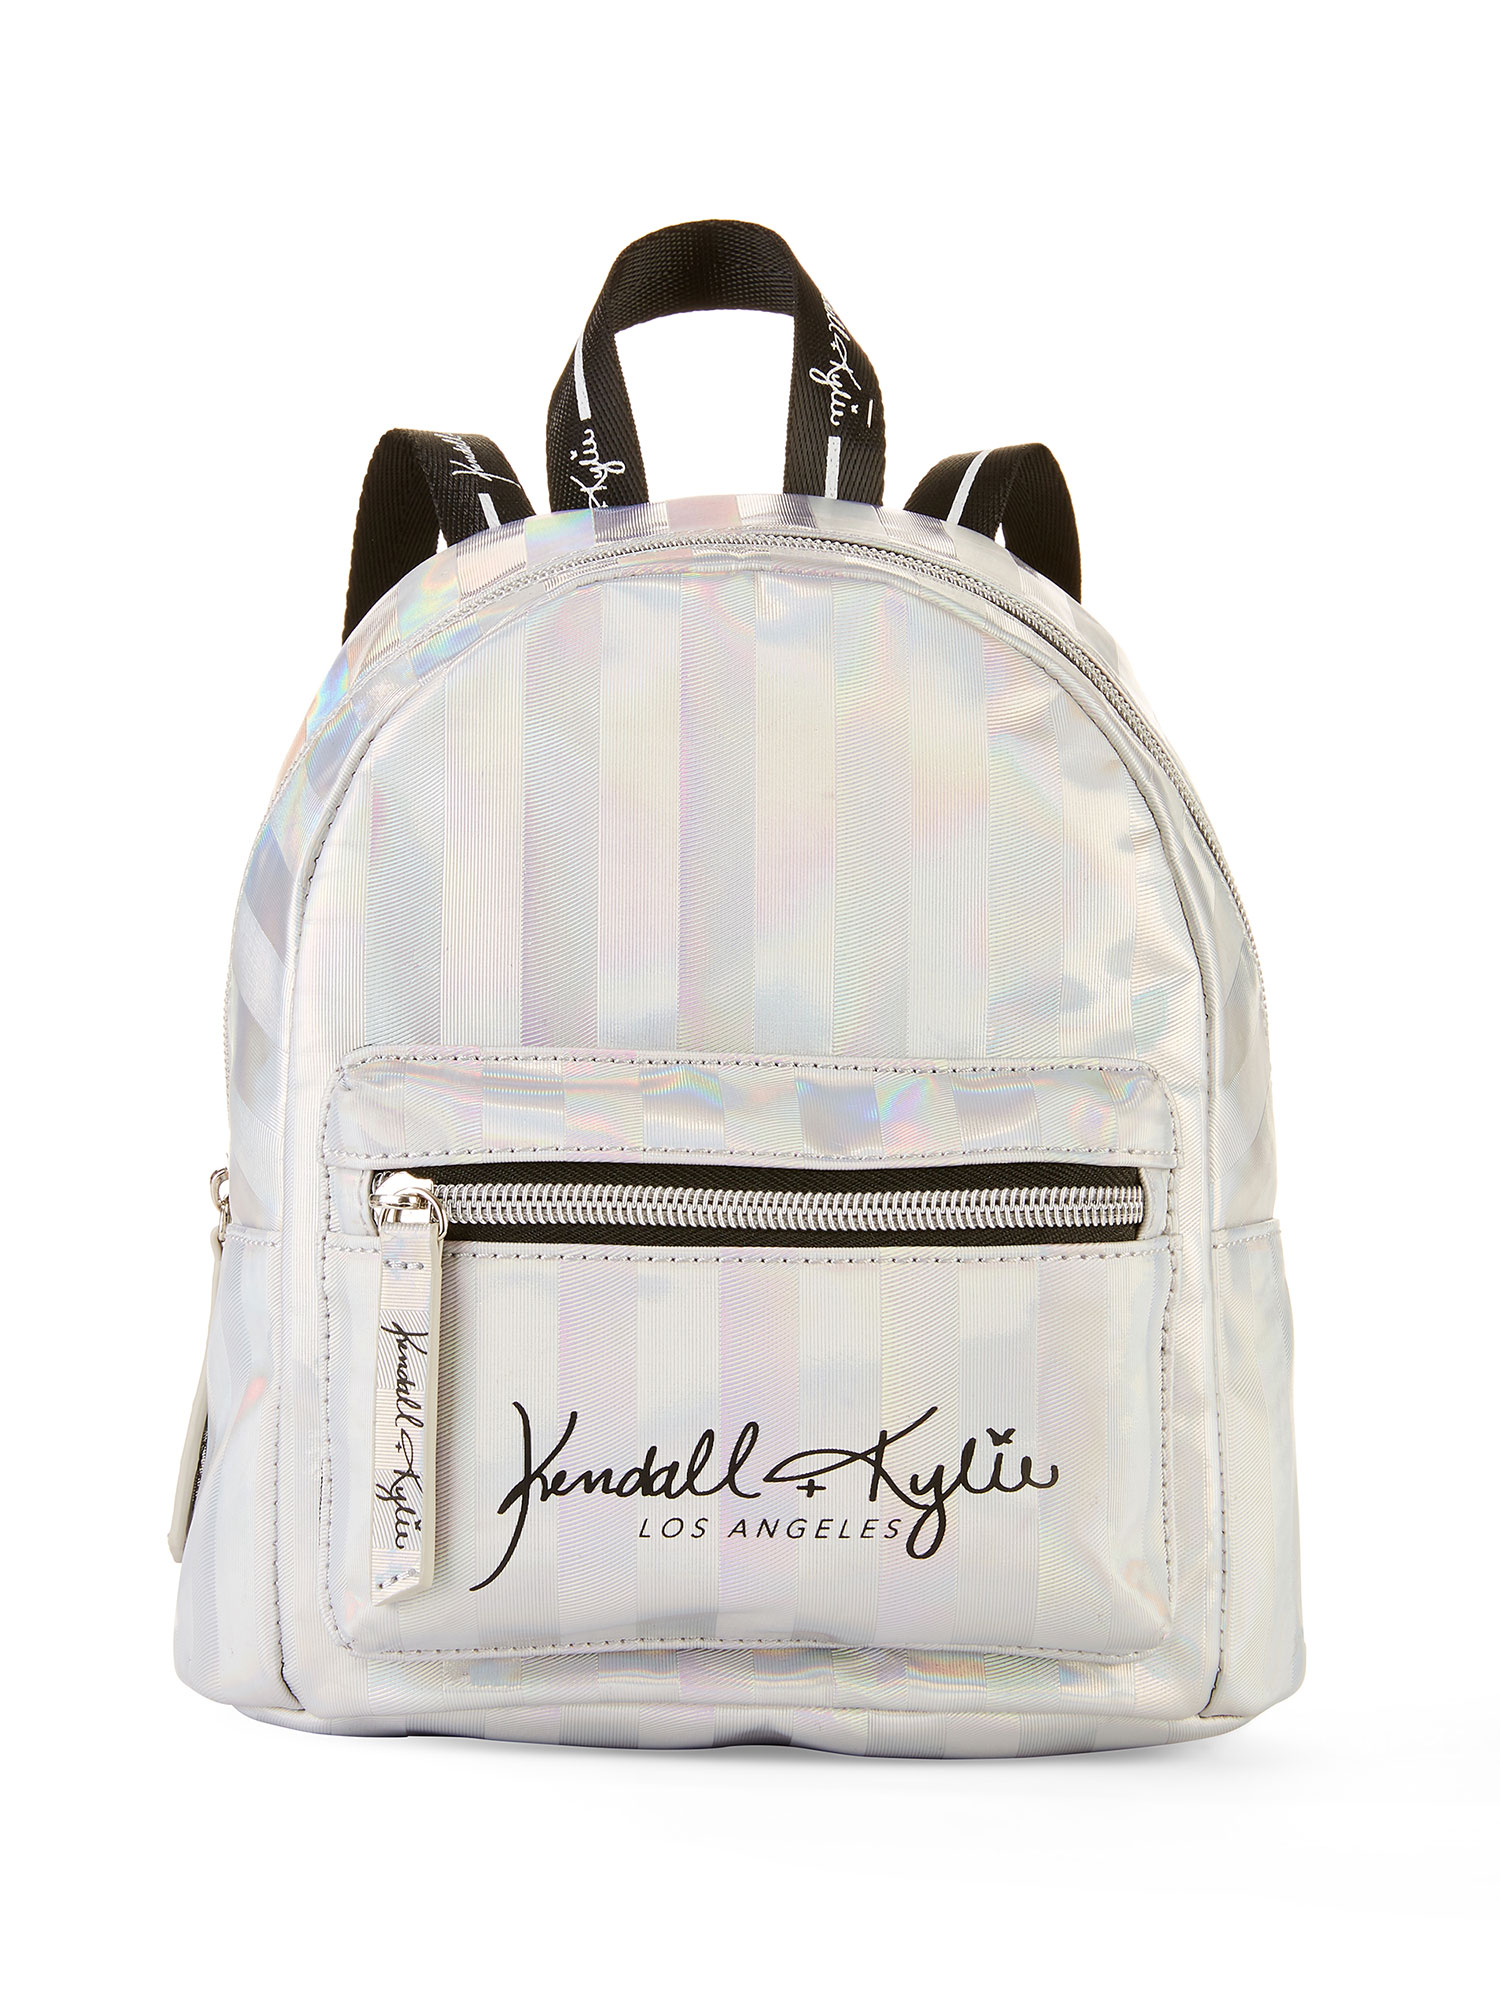 kendall and kylie backpack camo Online Sale